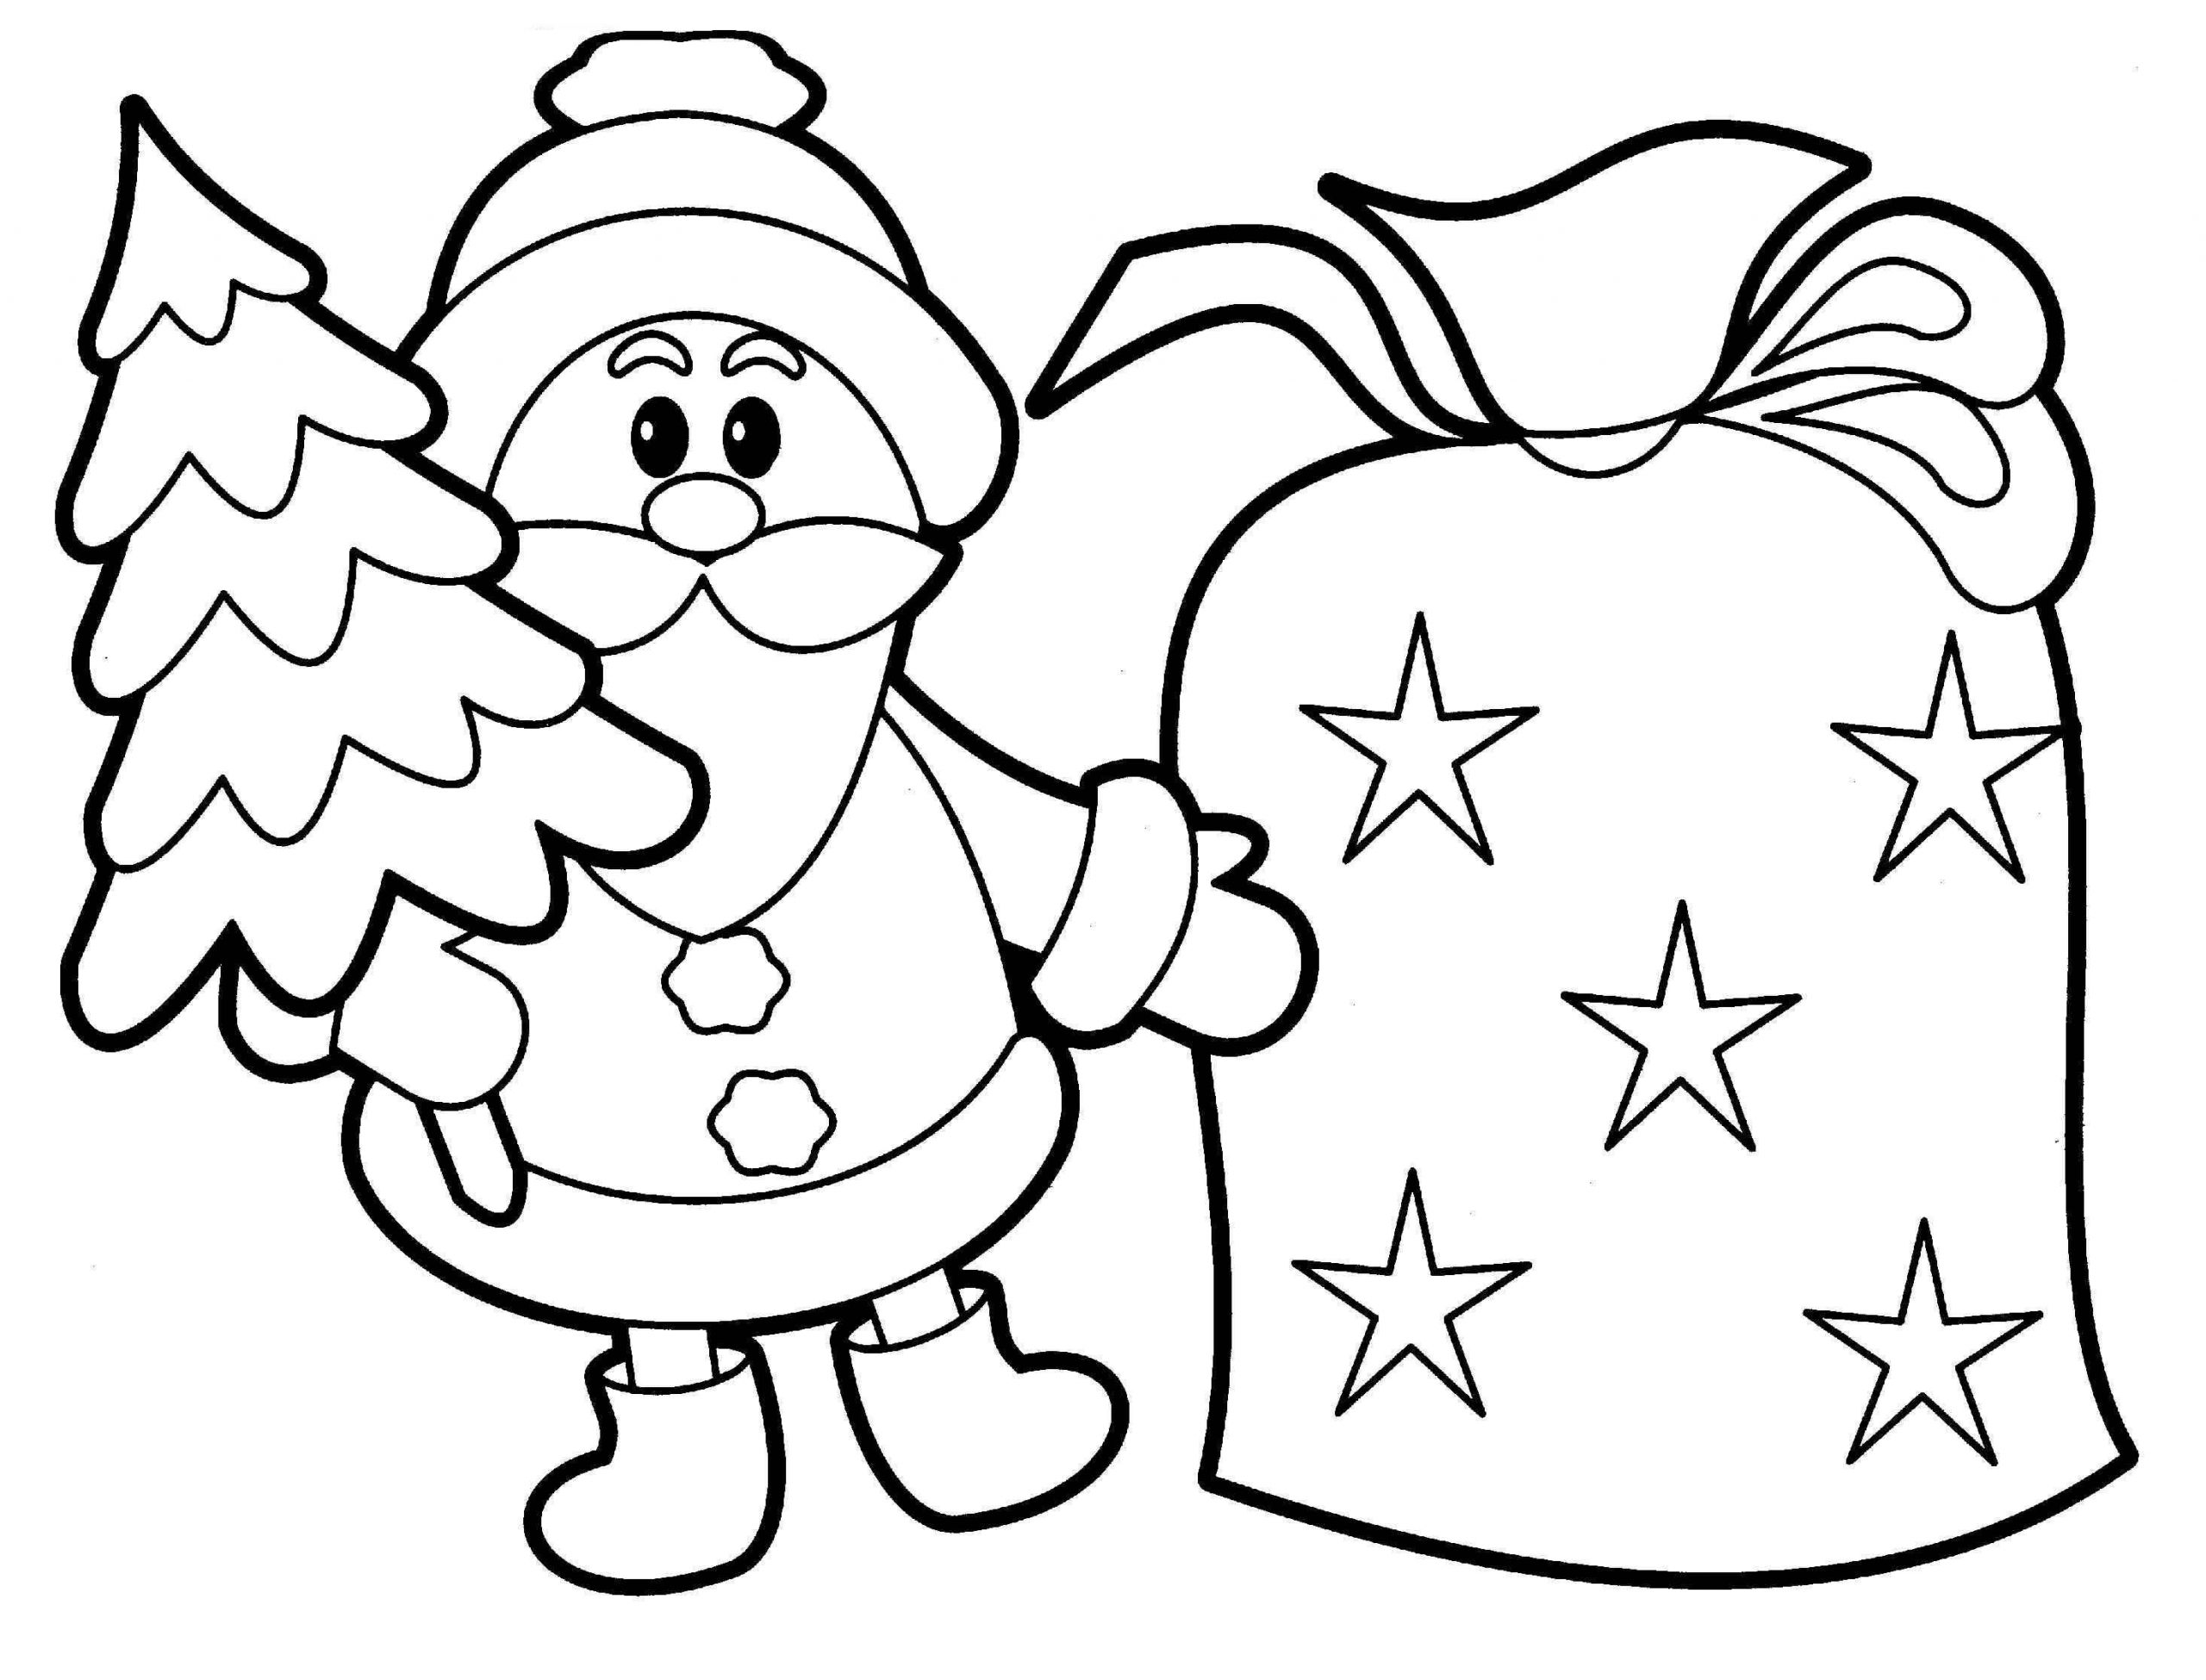 Toddler Christmas Coloring Pages
 Easy Preschool Coloring Pages